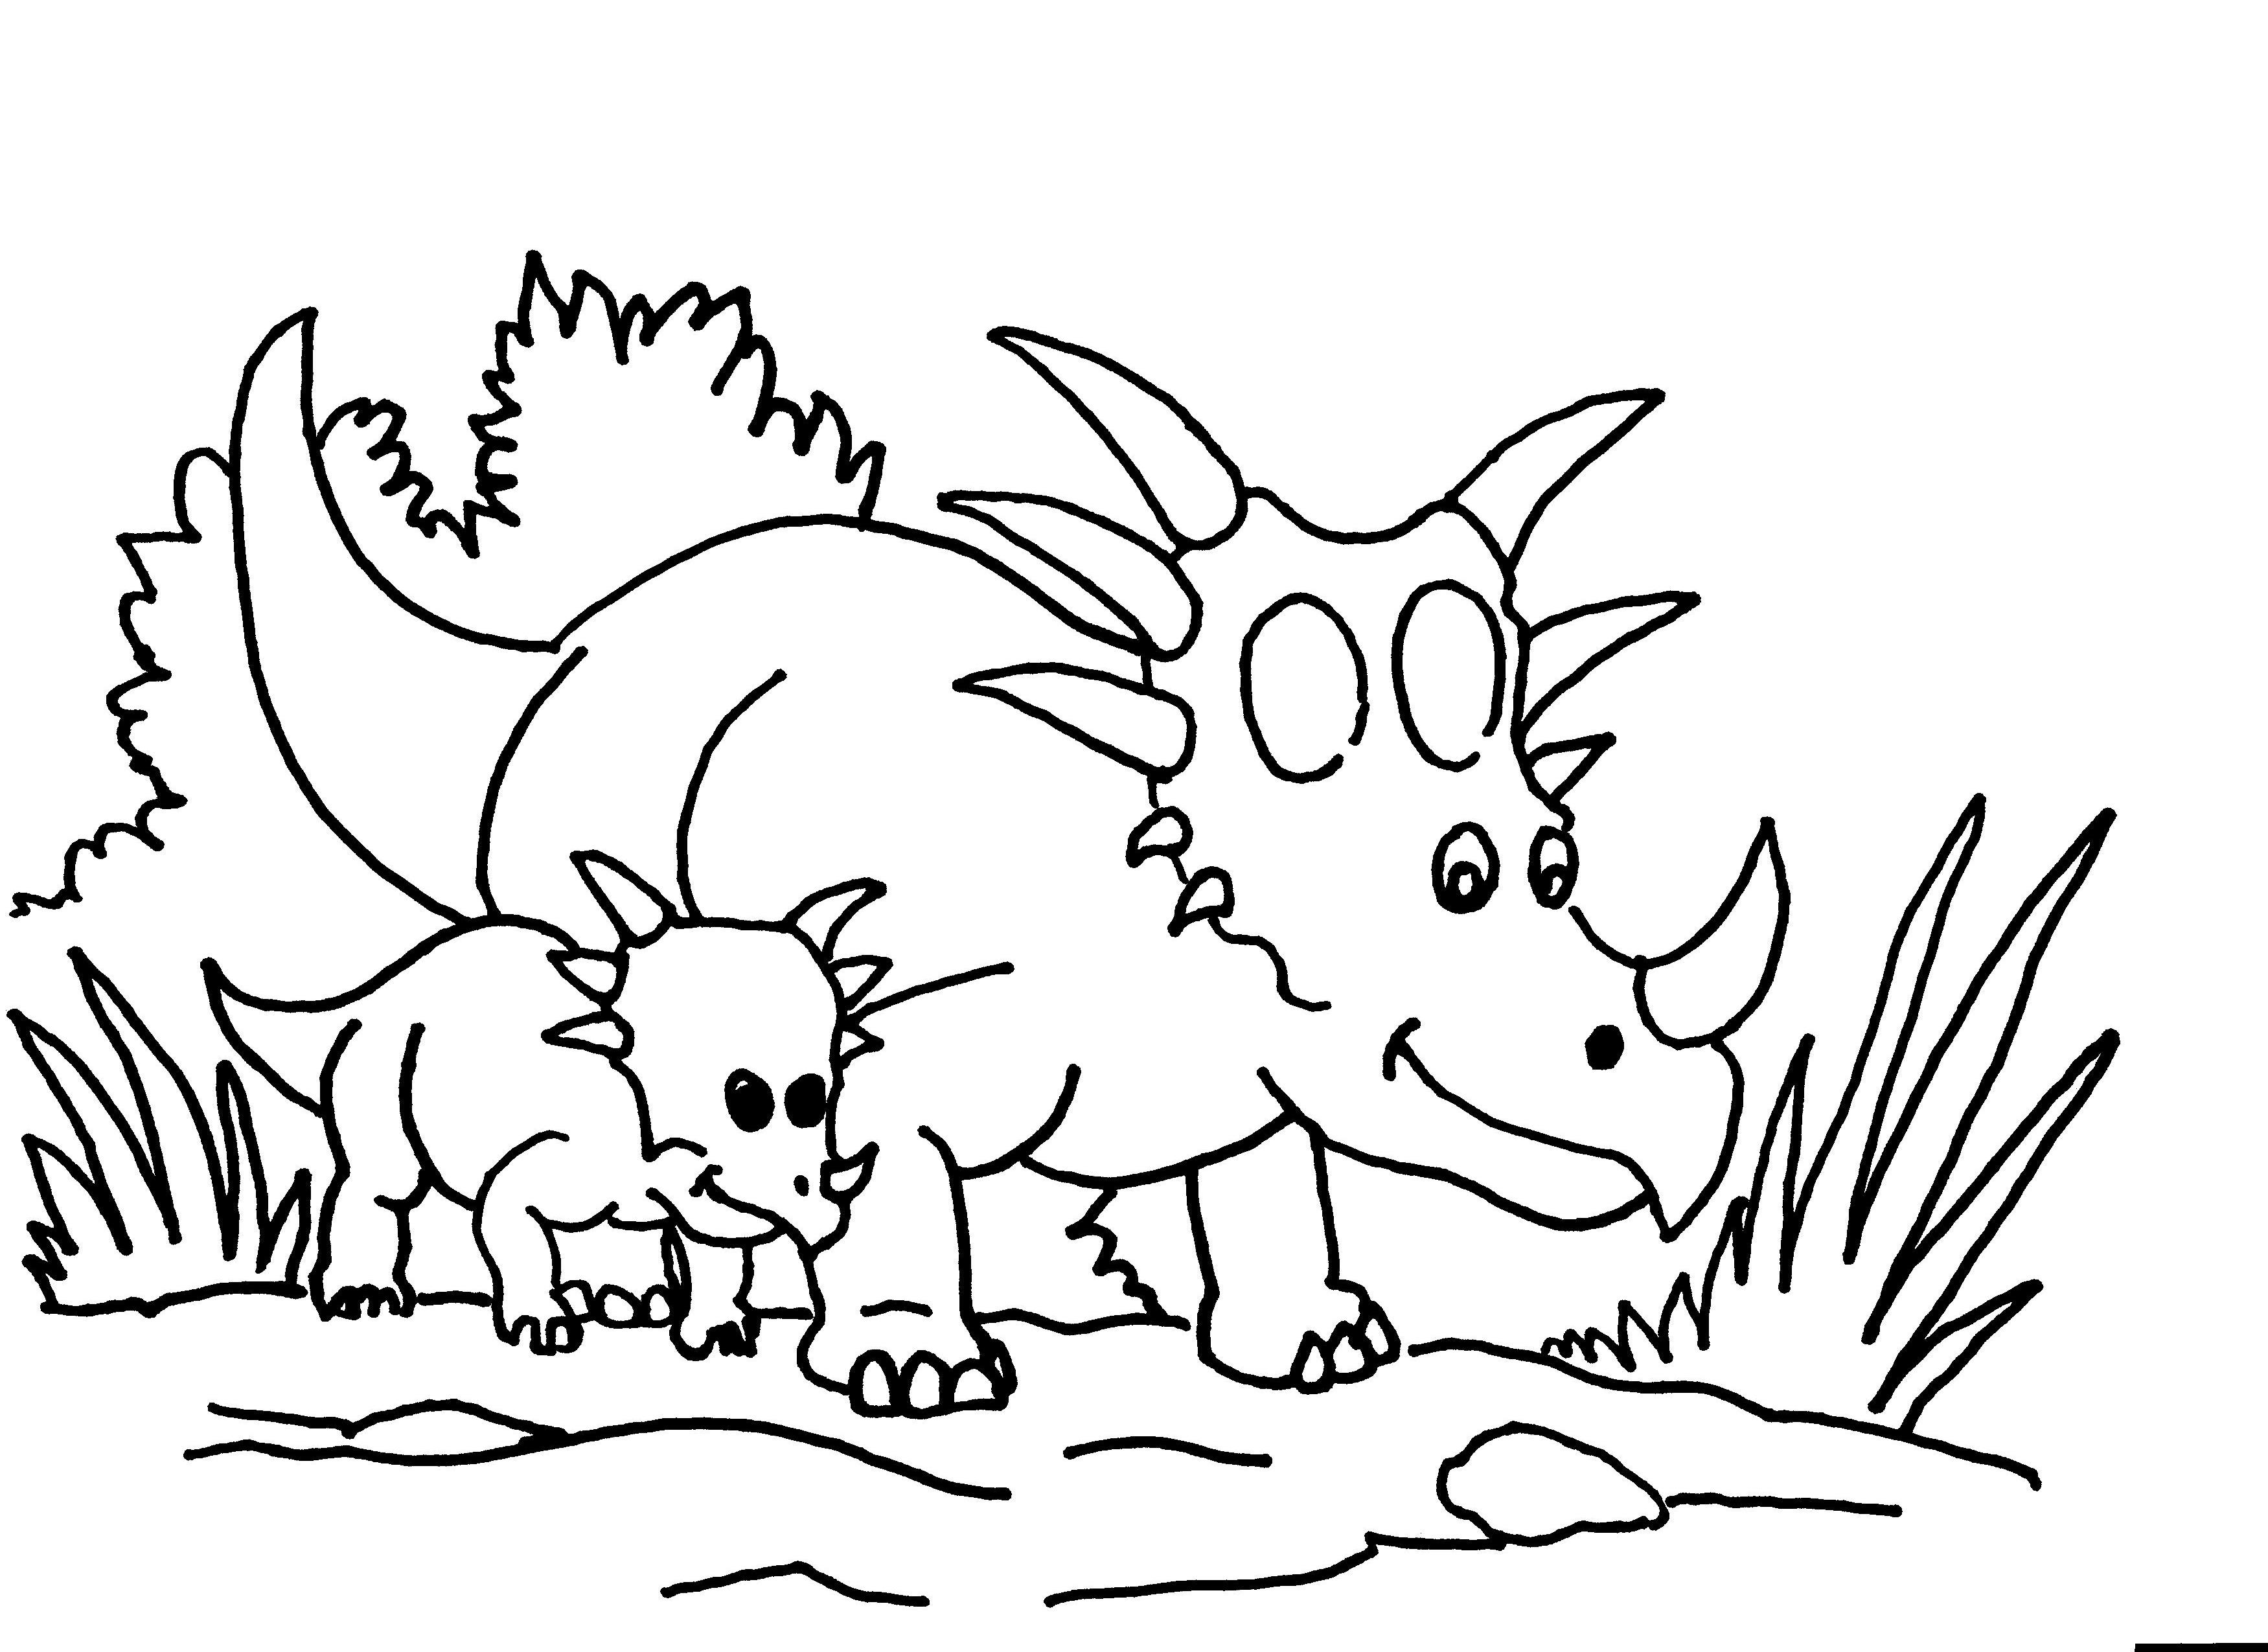 Dinosaur Coloring Page Images – Animal Place